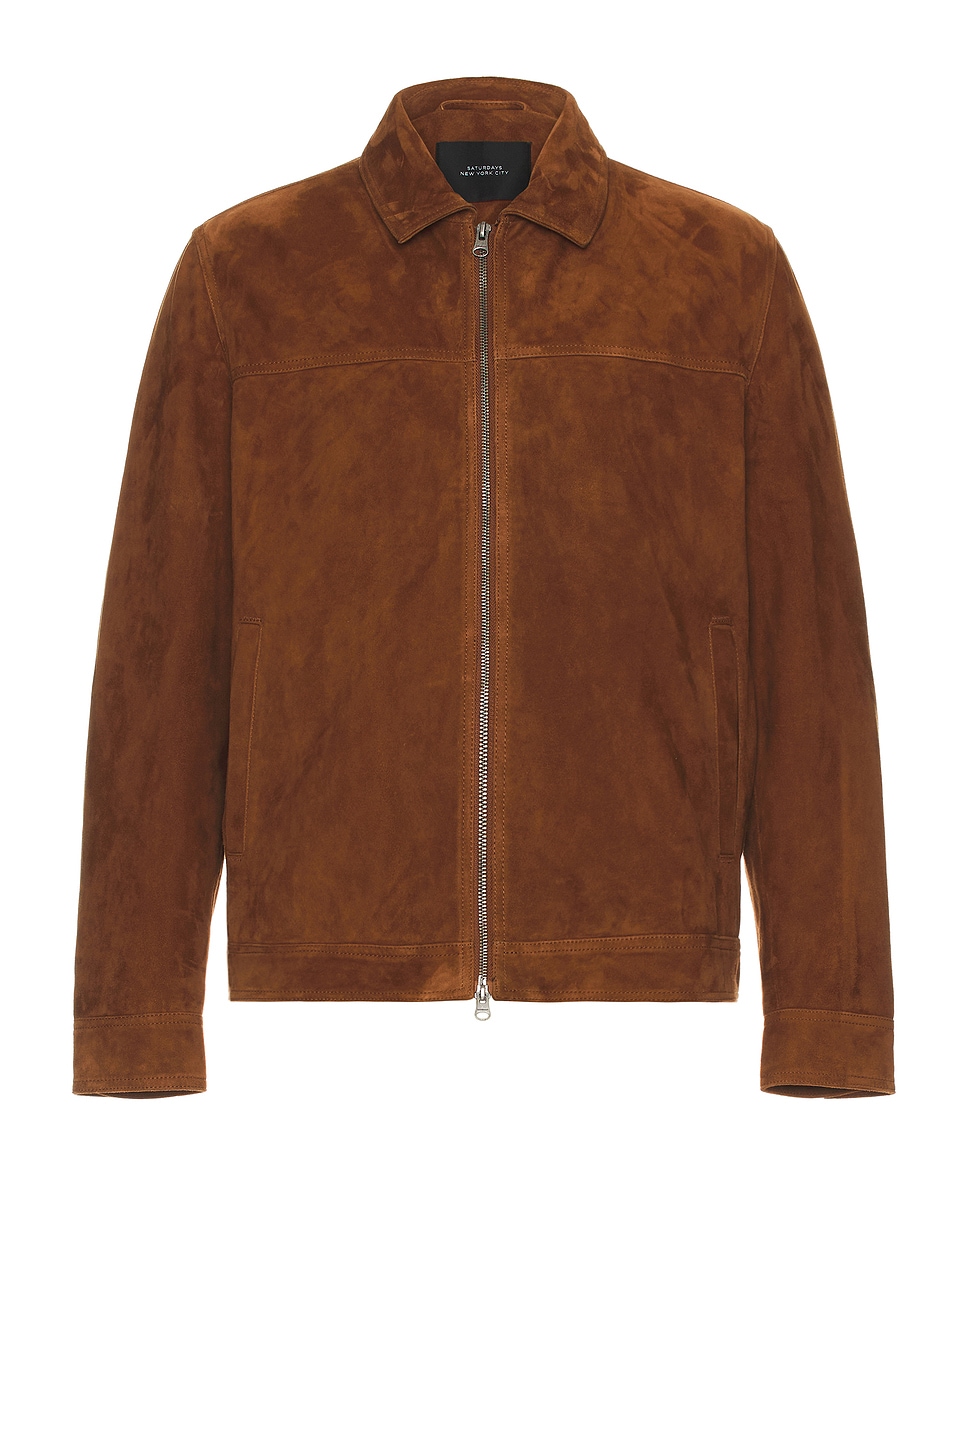 Image 1 of SATURDAYS NYC Harrison Trucker Jacket in Downtown Brown